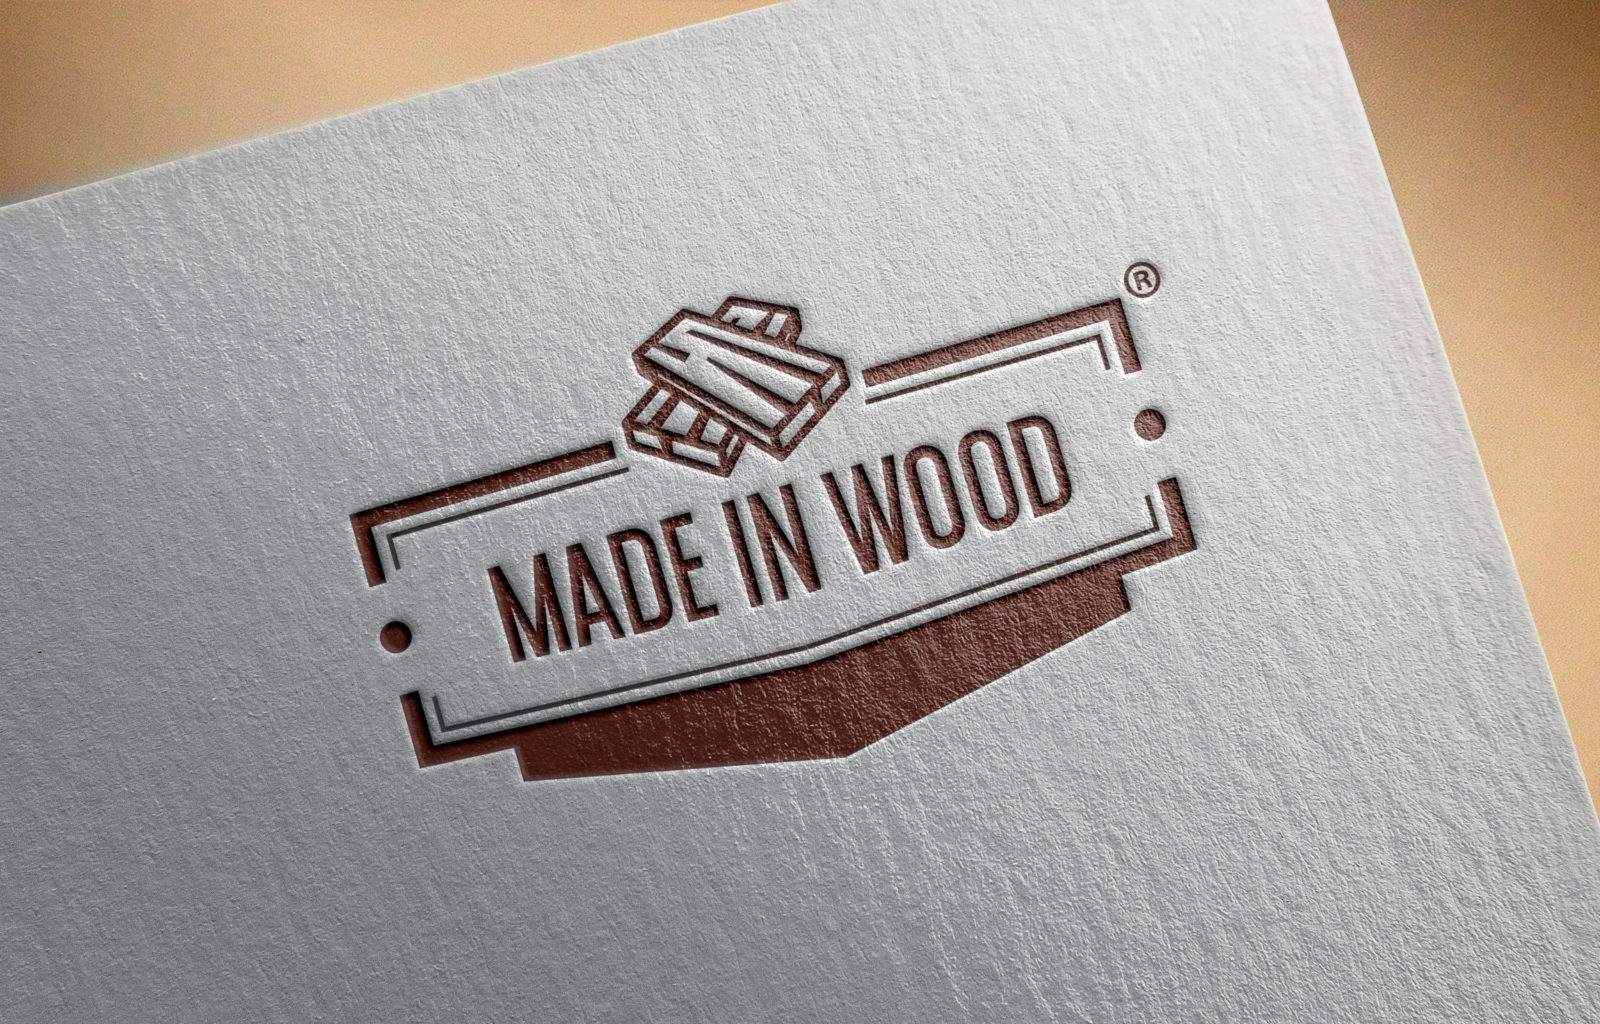 Made in wood